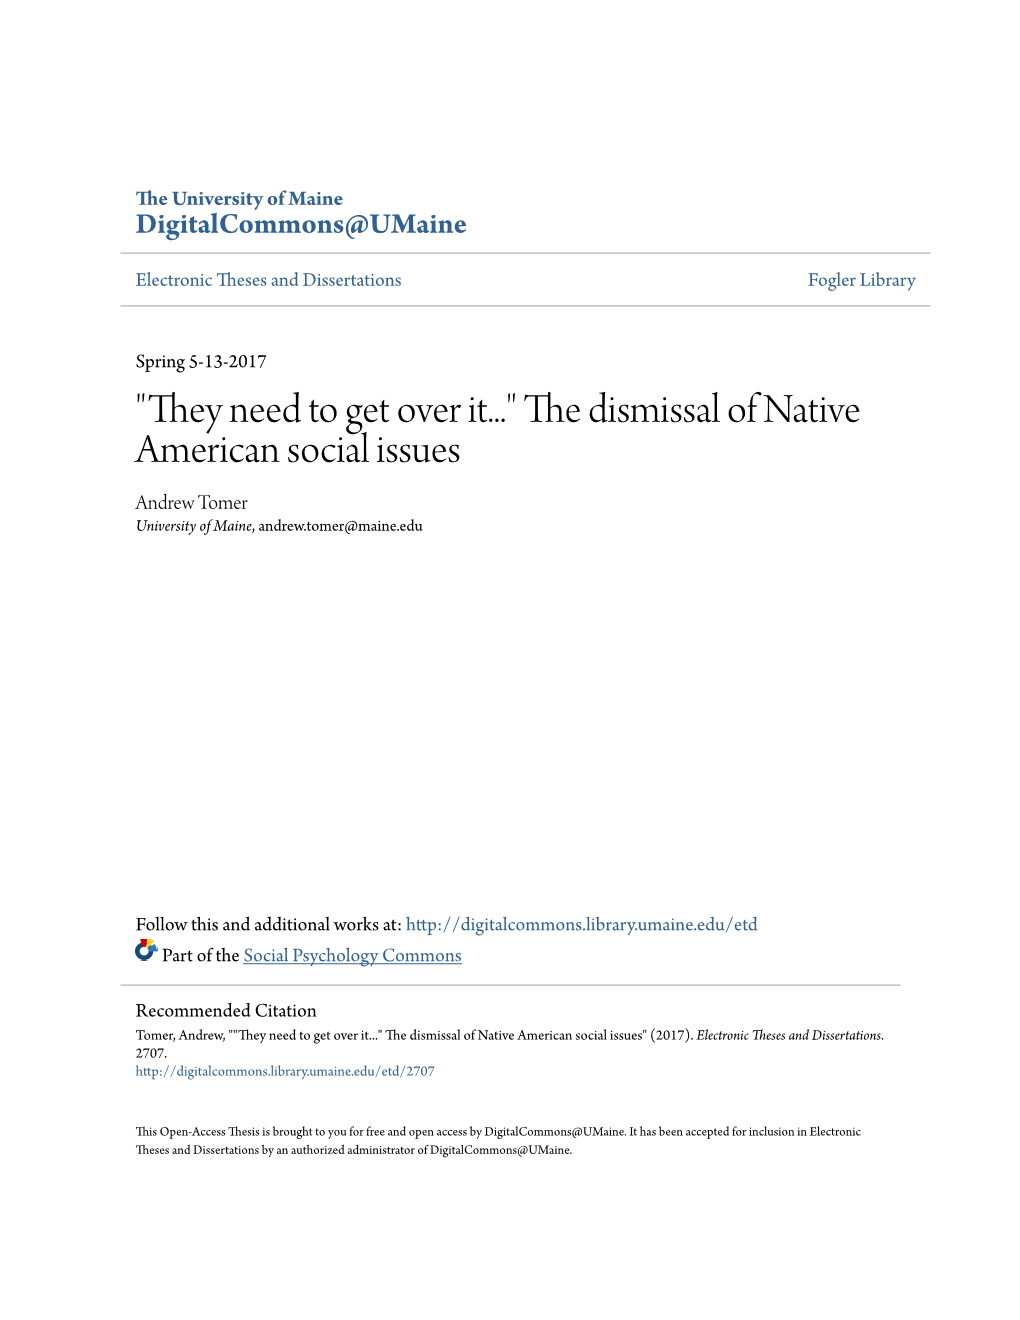 The Dismissal of Native American Social Issues Andrew Tomer University of Maine, Andrew.Tomer@Maine.Edu